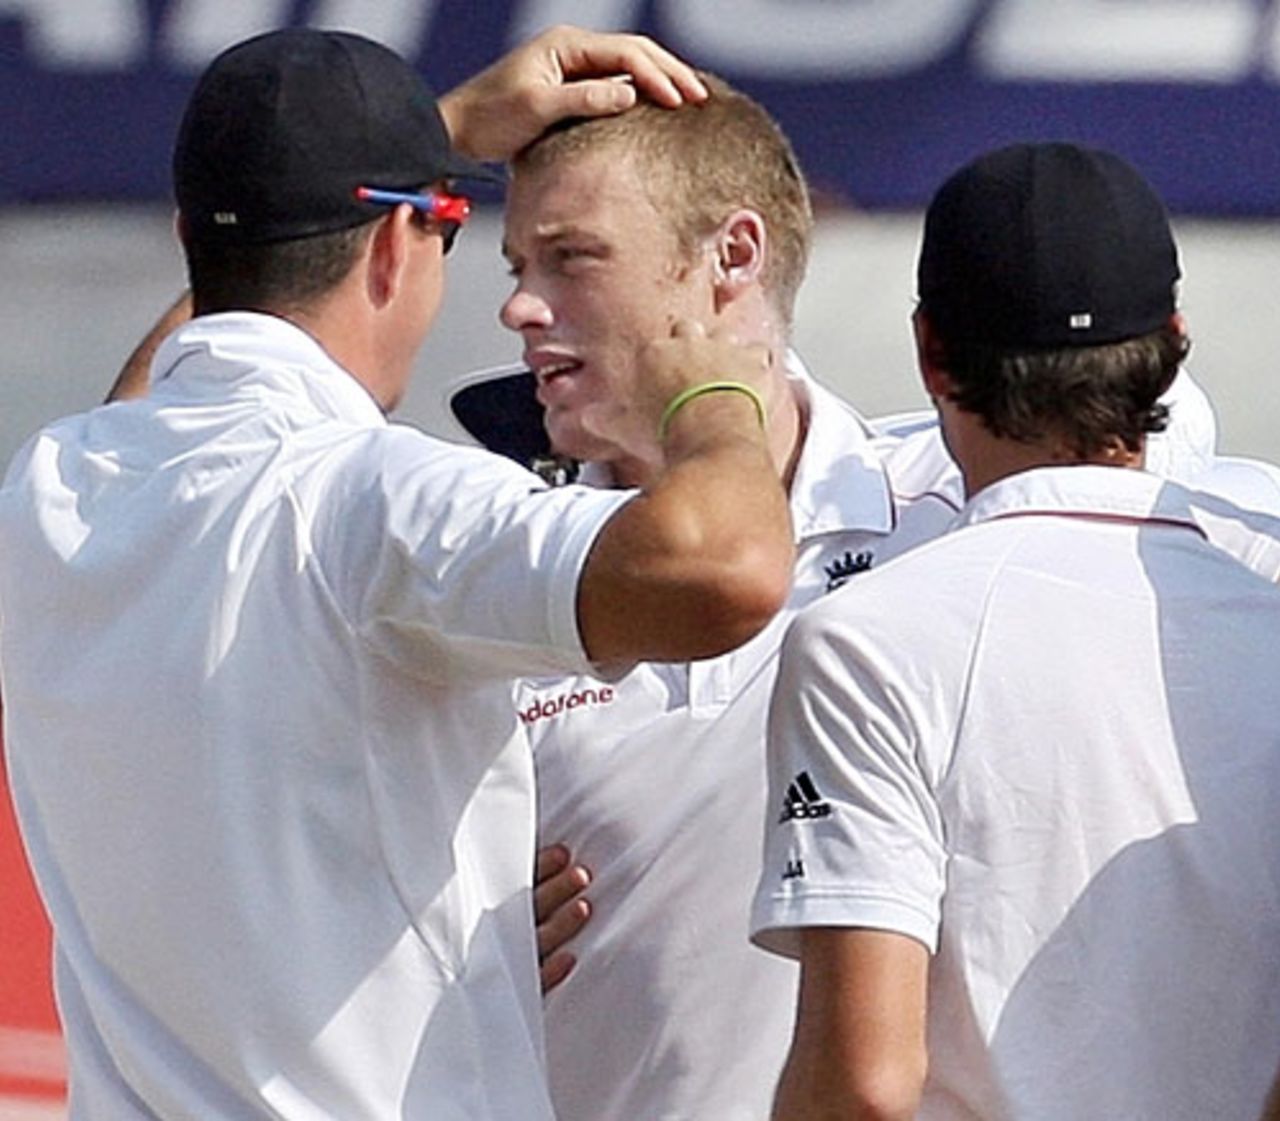 Andrew Flintoff is congratulated by Kevin Pietersen for dismissing Rahul Dravid, India v England, 1st Test, Chennai, 5th day, December 15, 2008